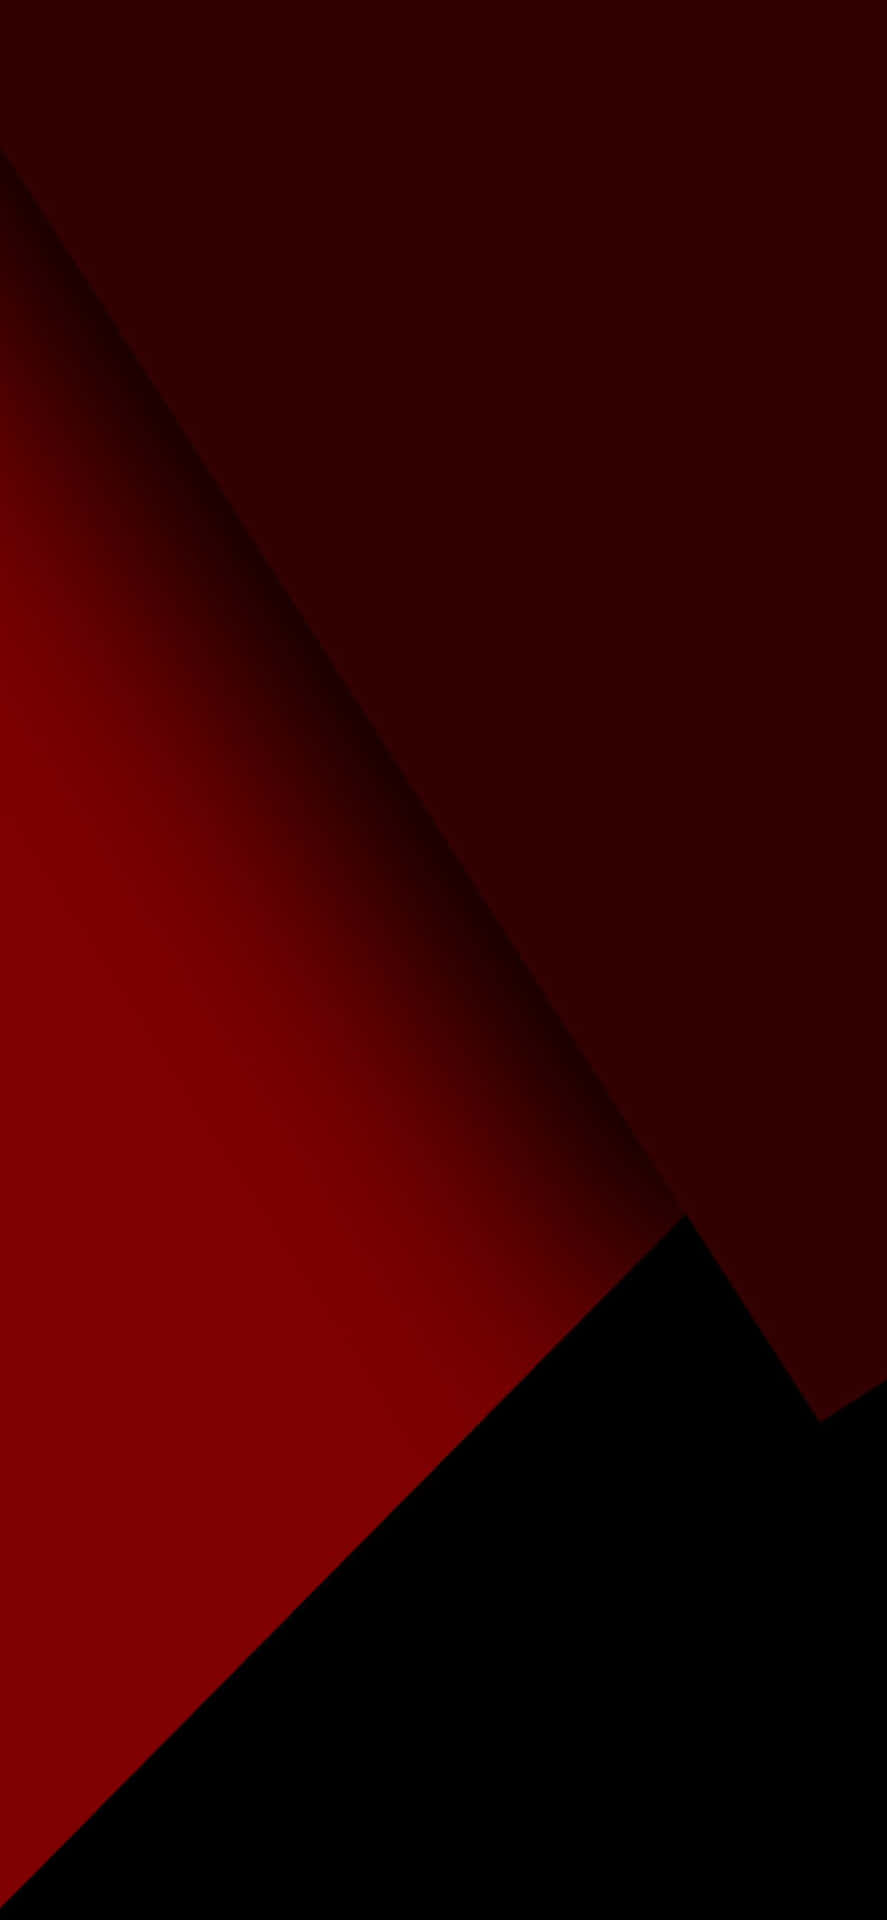 A Bold and Eye-Catching Combination - Black and Red Iphone Wallpaper